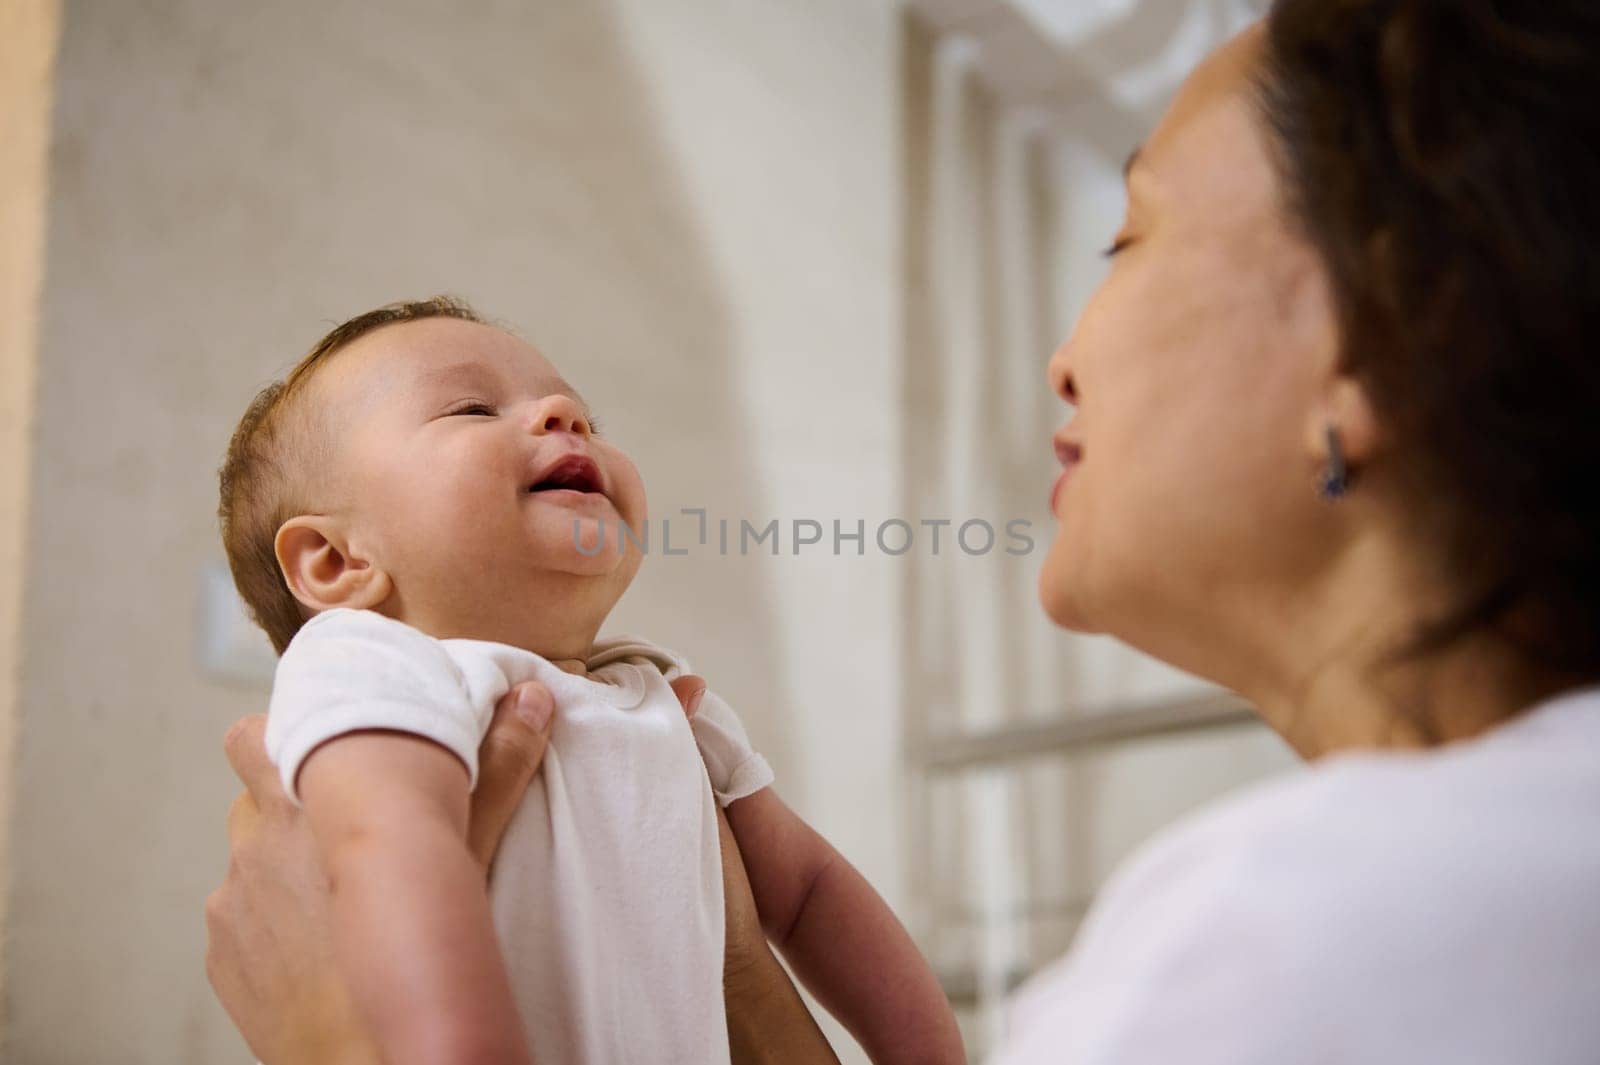 Close-up authentic portrait of a baby boy expressing positive emotions, smiling and laughing being in the arms of mom by artgf